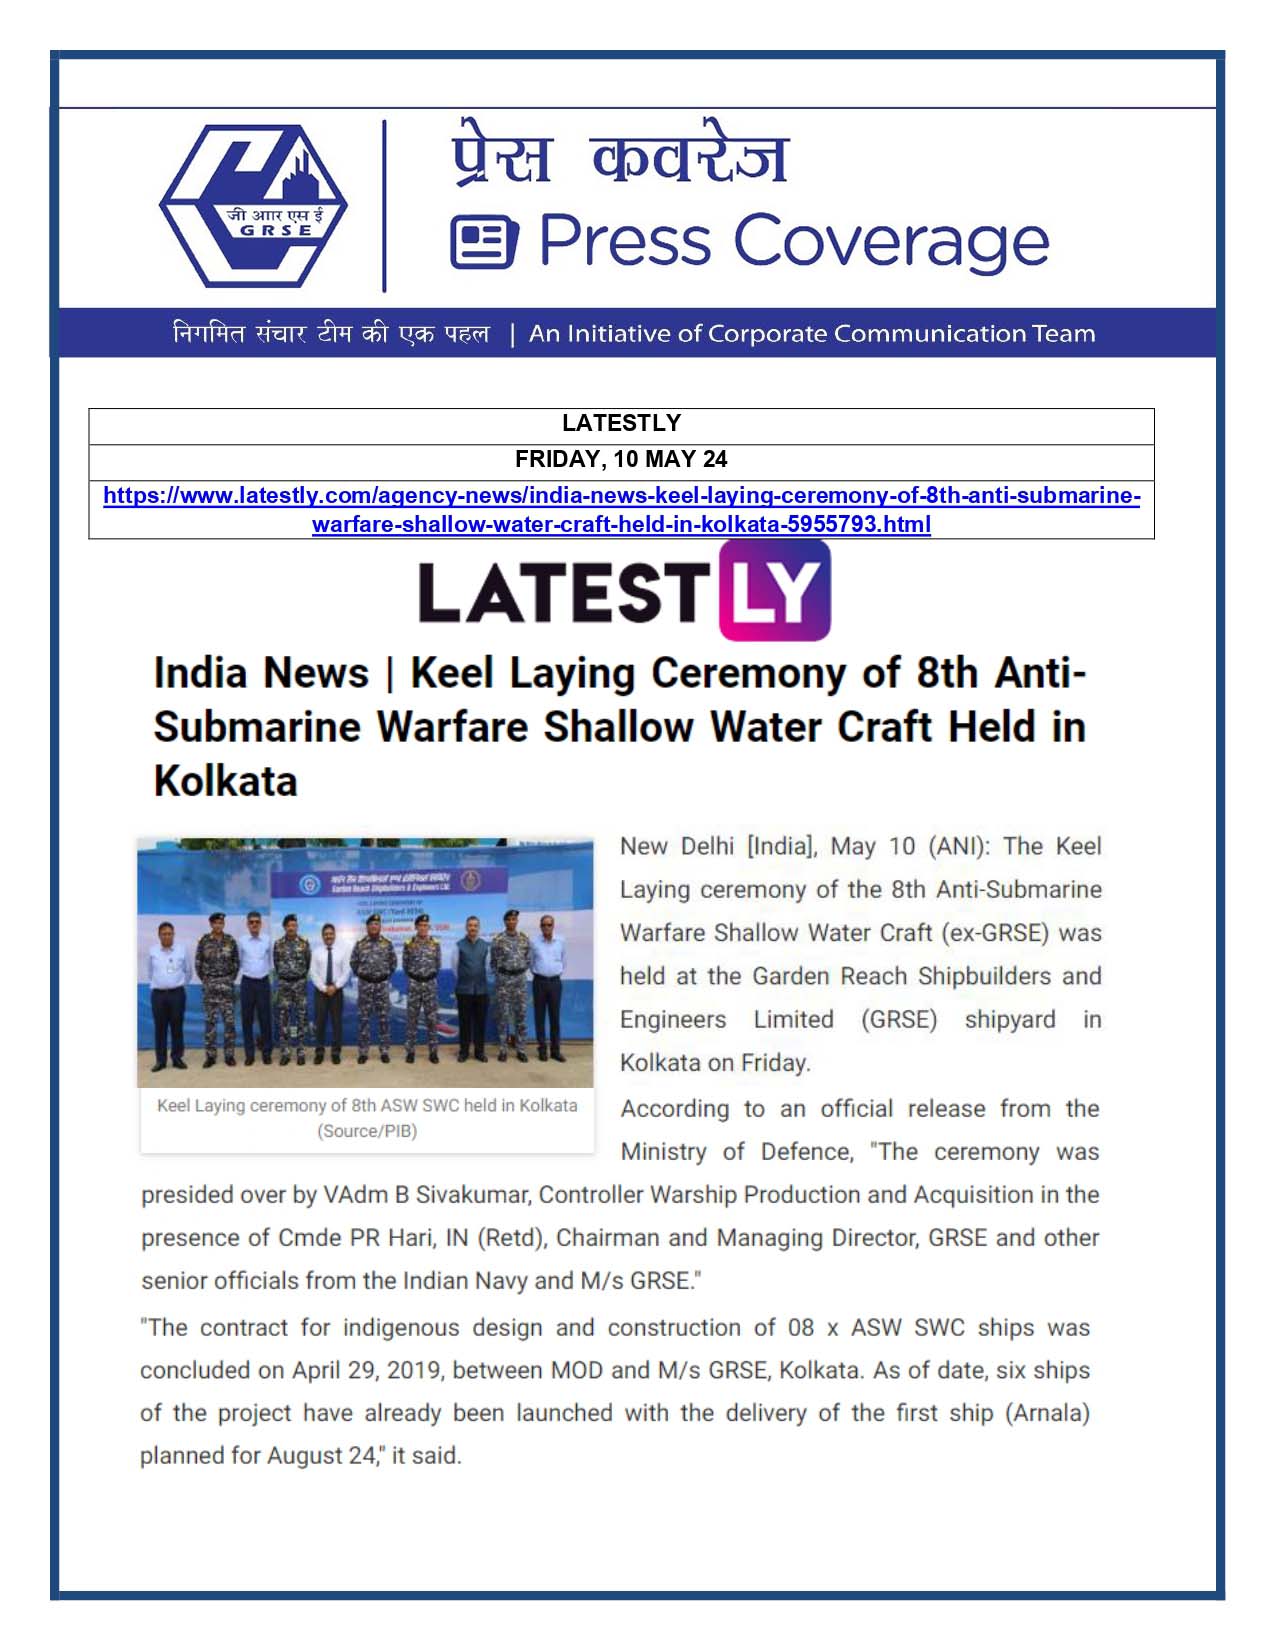 Press Coverage : Latestly, 10 May 24 : Keel Laying Ceremony of 8th Anti-Submarine Warfare Shallow Water Craft held in Kolkata